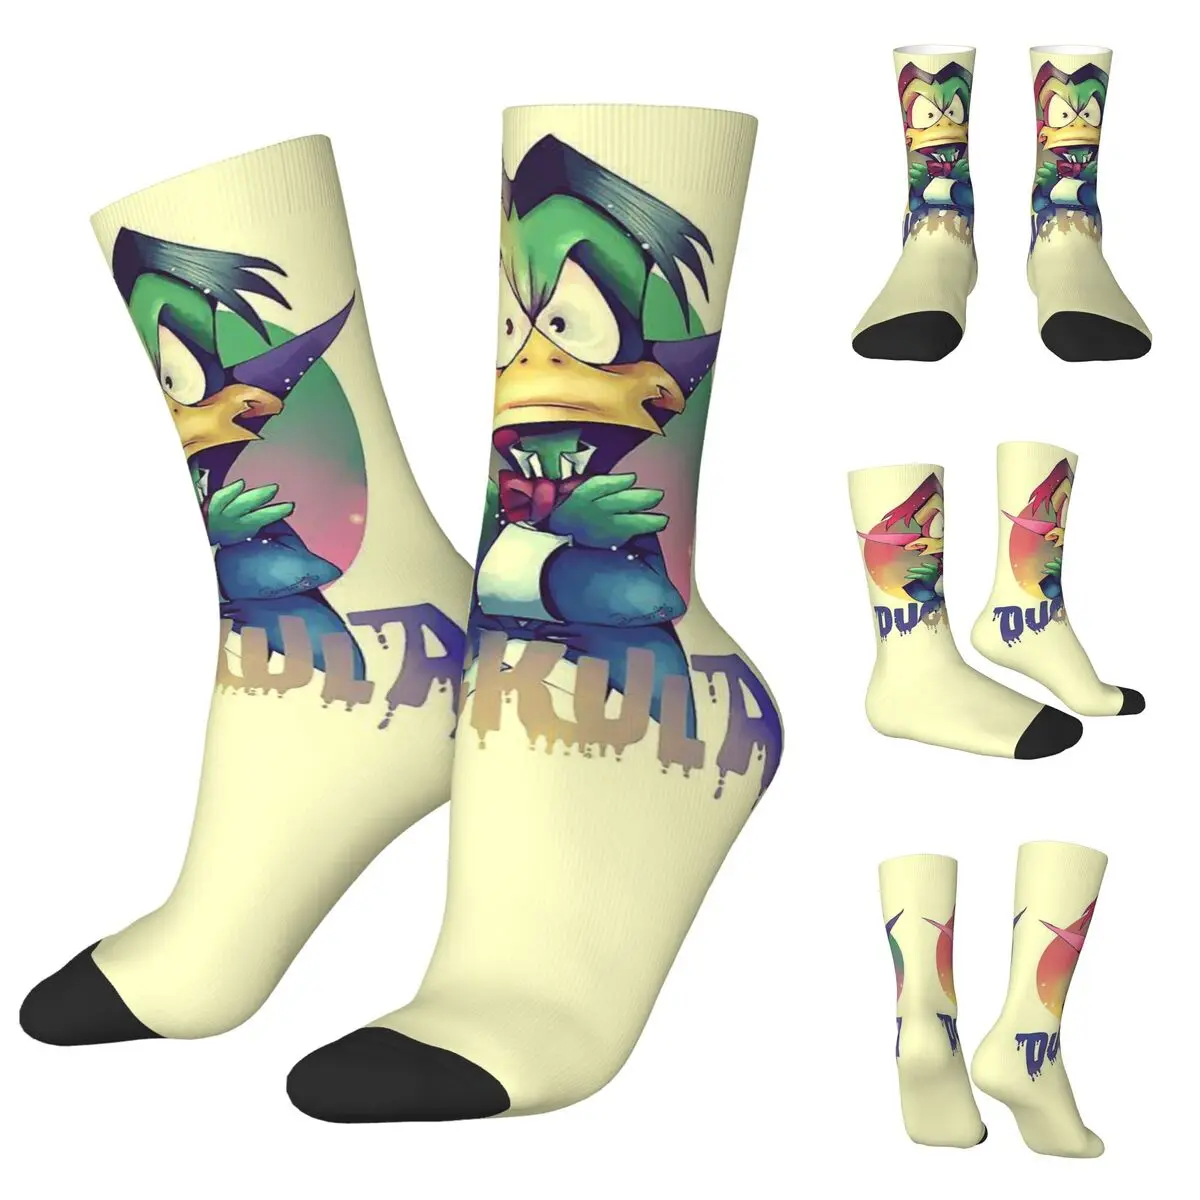 Count Duckula Vampire Lord The Castle Straight cosy Unisex Socks,Running Happy 3D printing Socks,Street Style Crazy Sock the castle